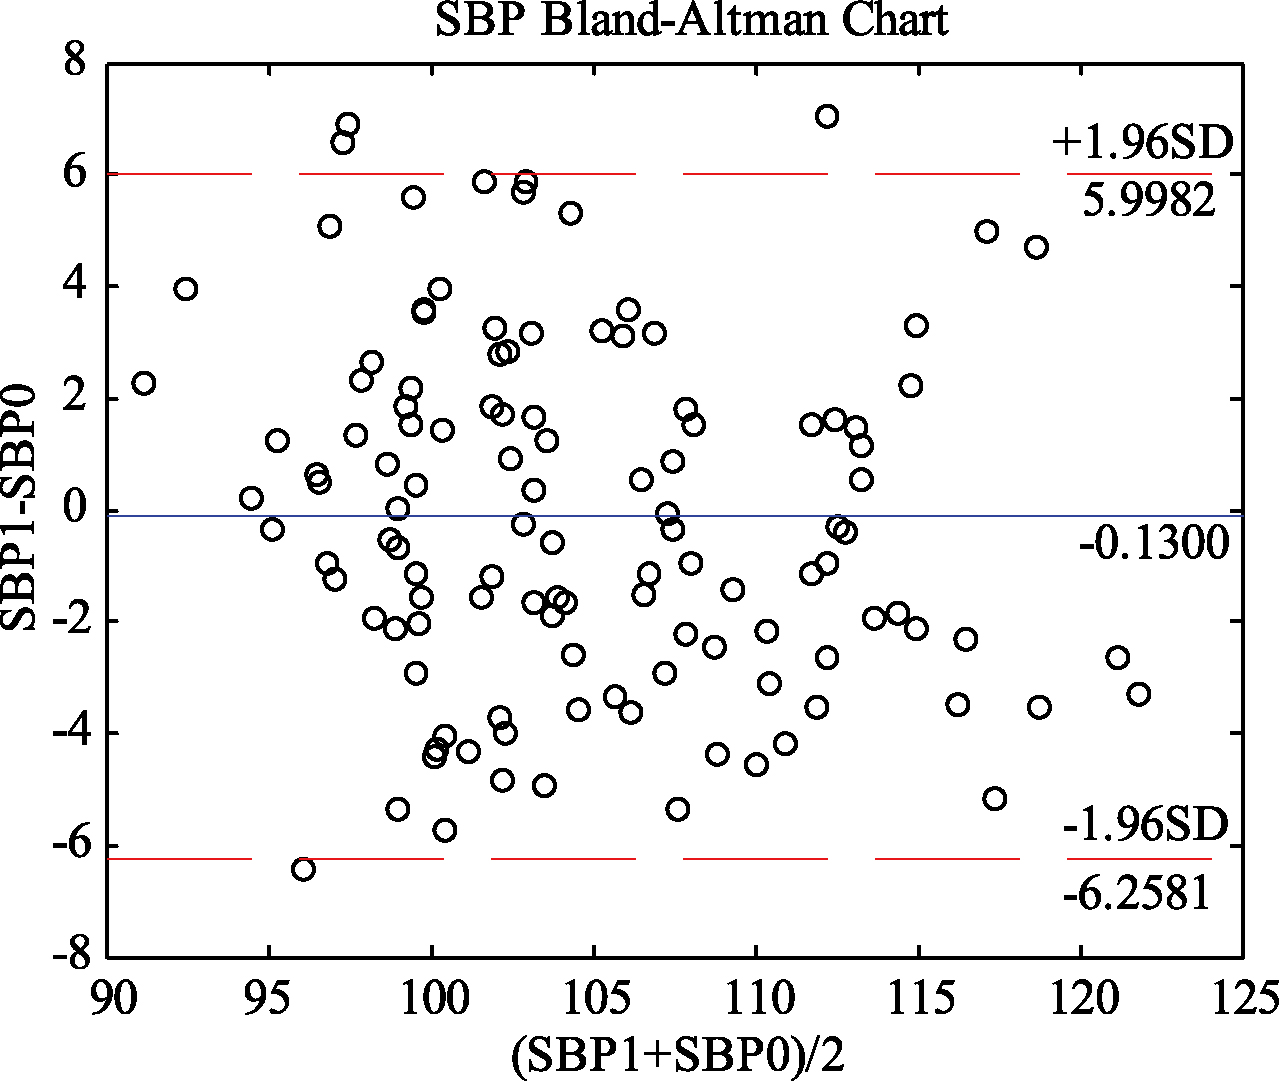 Bland-Altman analysis of predicted and measured SBP values (SBP1 and SBP0).